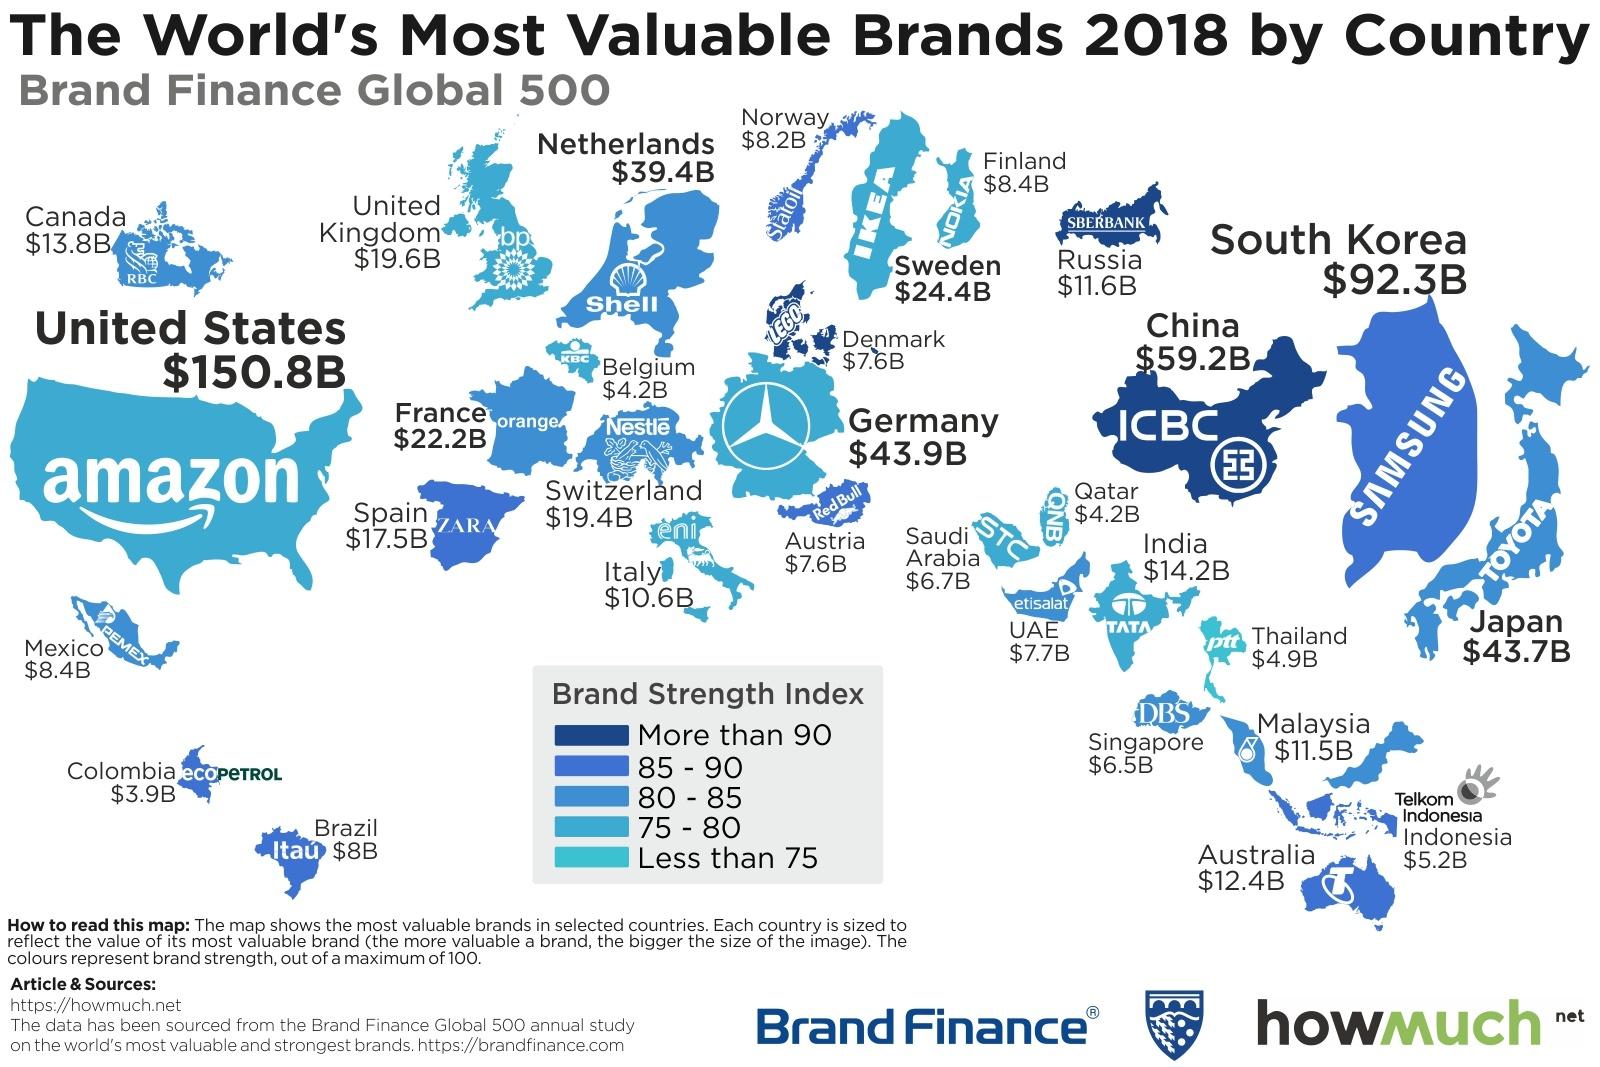 Top 10 Countries with the Most Valuable Brands in the World